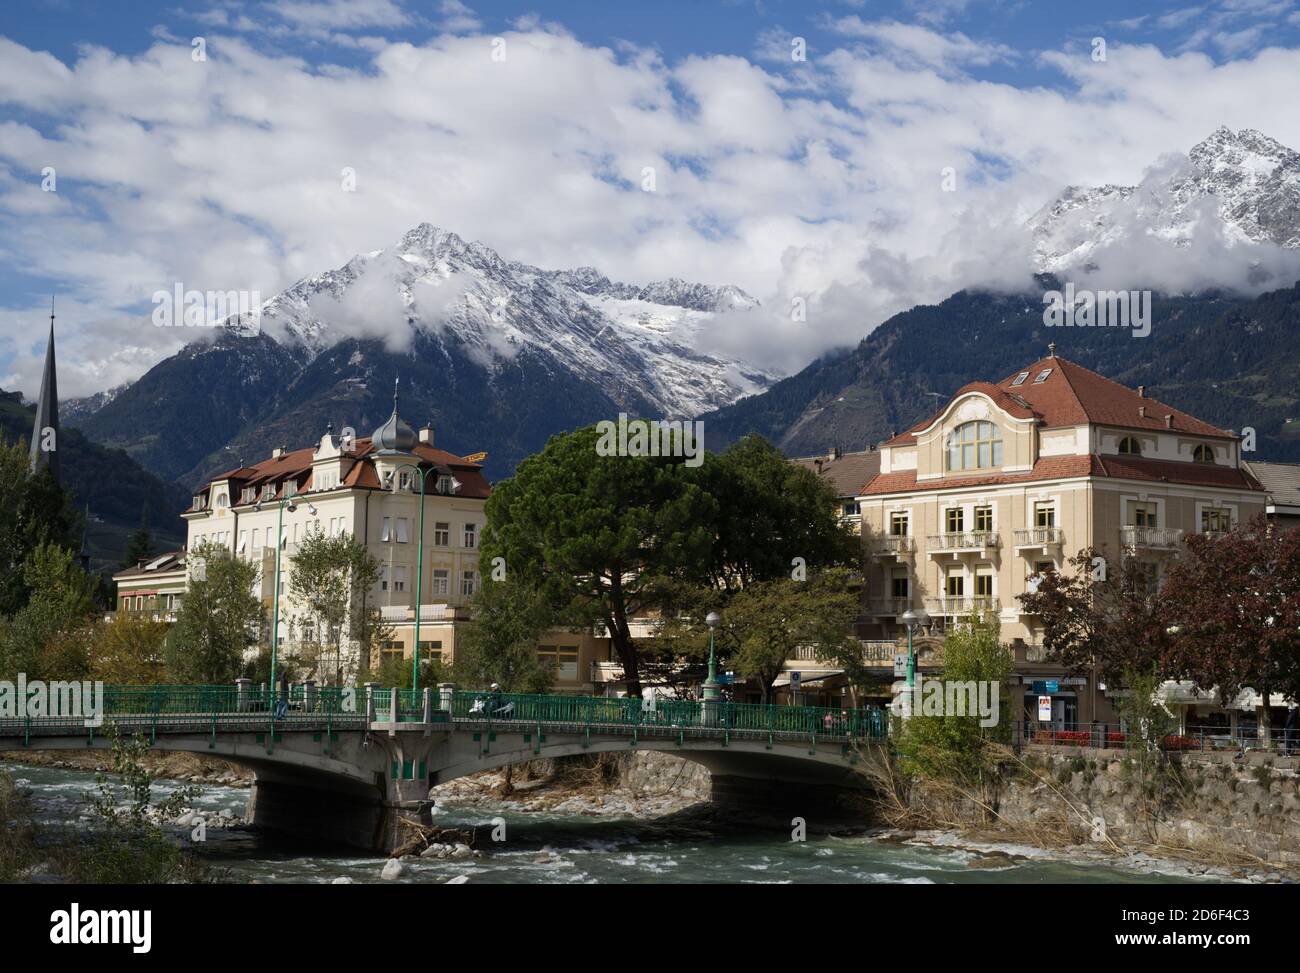 Merano spa-town in Italy in autumn, October 15th 2020. Bridge over the Passer river in foreground, Alps covered by snow in the background. Stock Photo